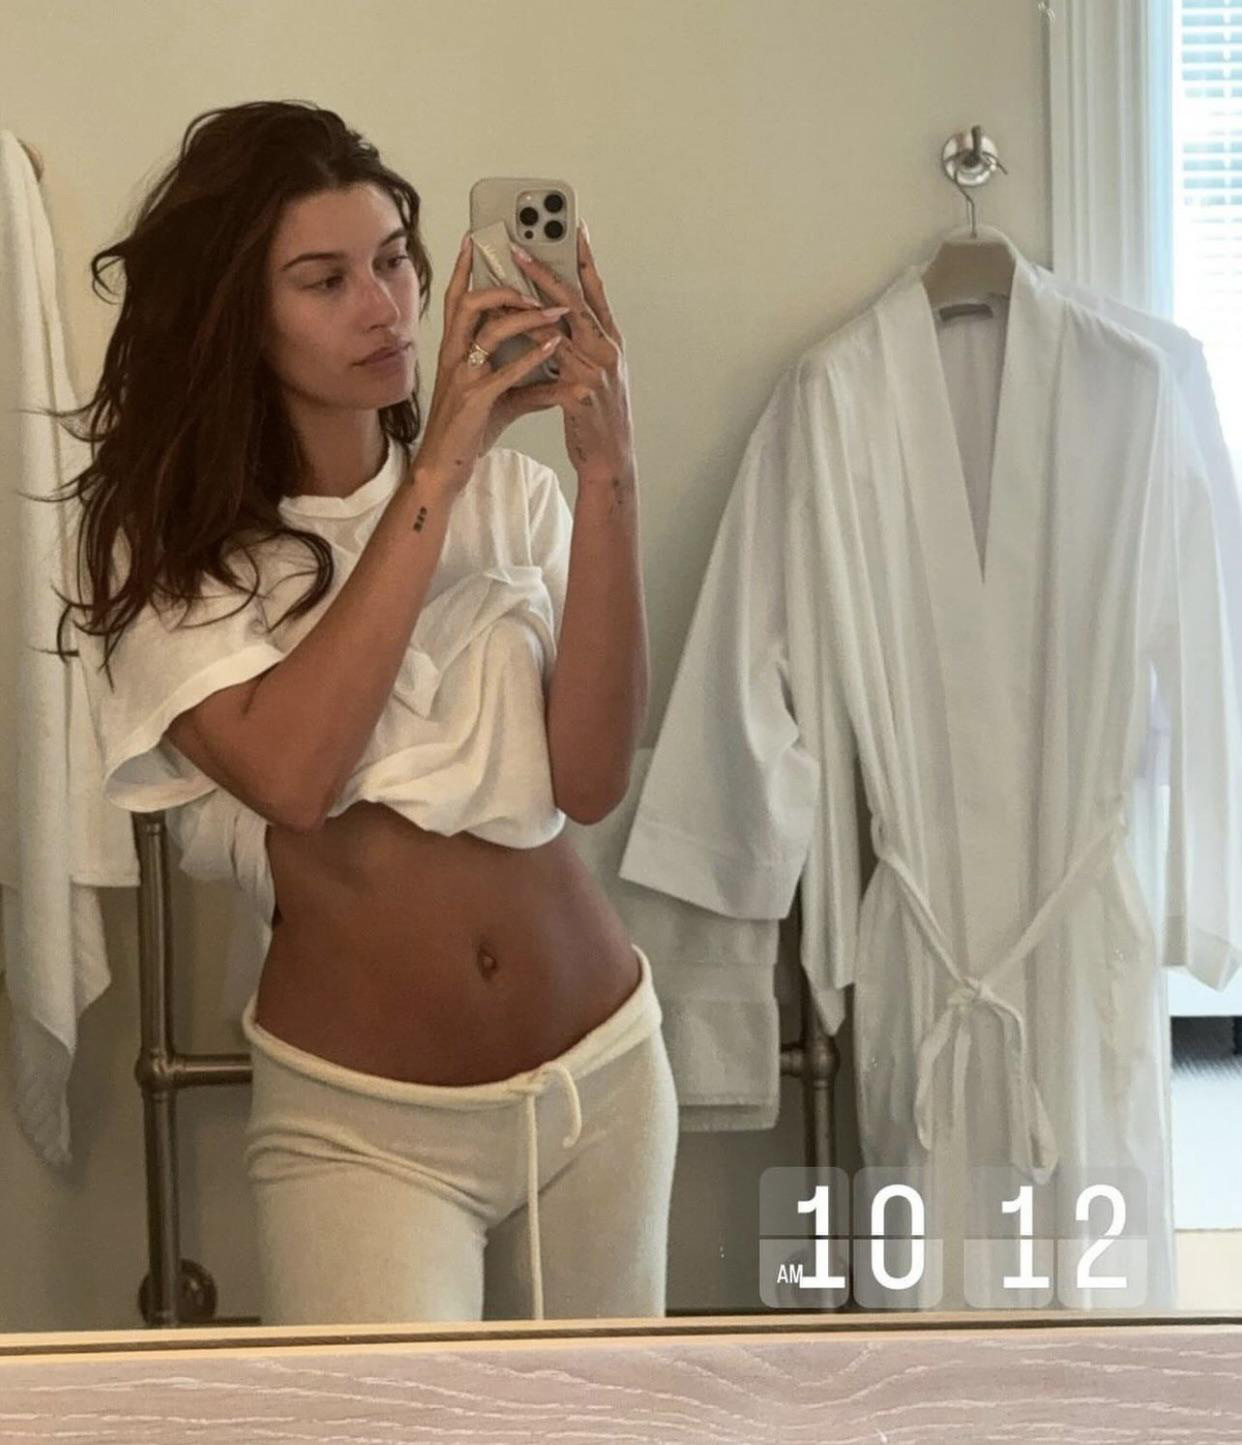 Fans noticed that the star seemed 'bloated' and that her belly button was 'sticking out' as she pulled up her top in a mirror selfie